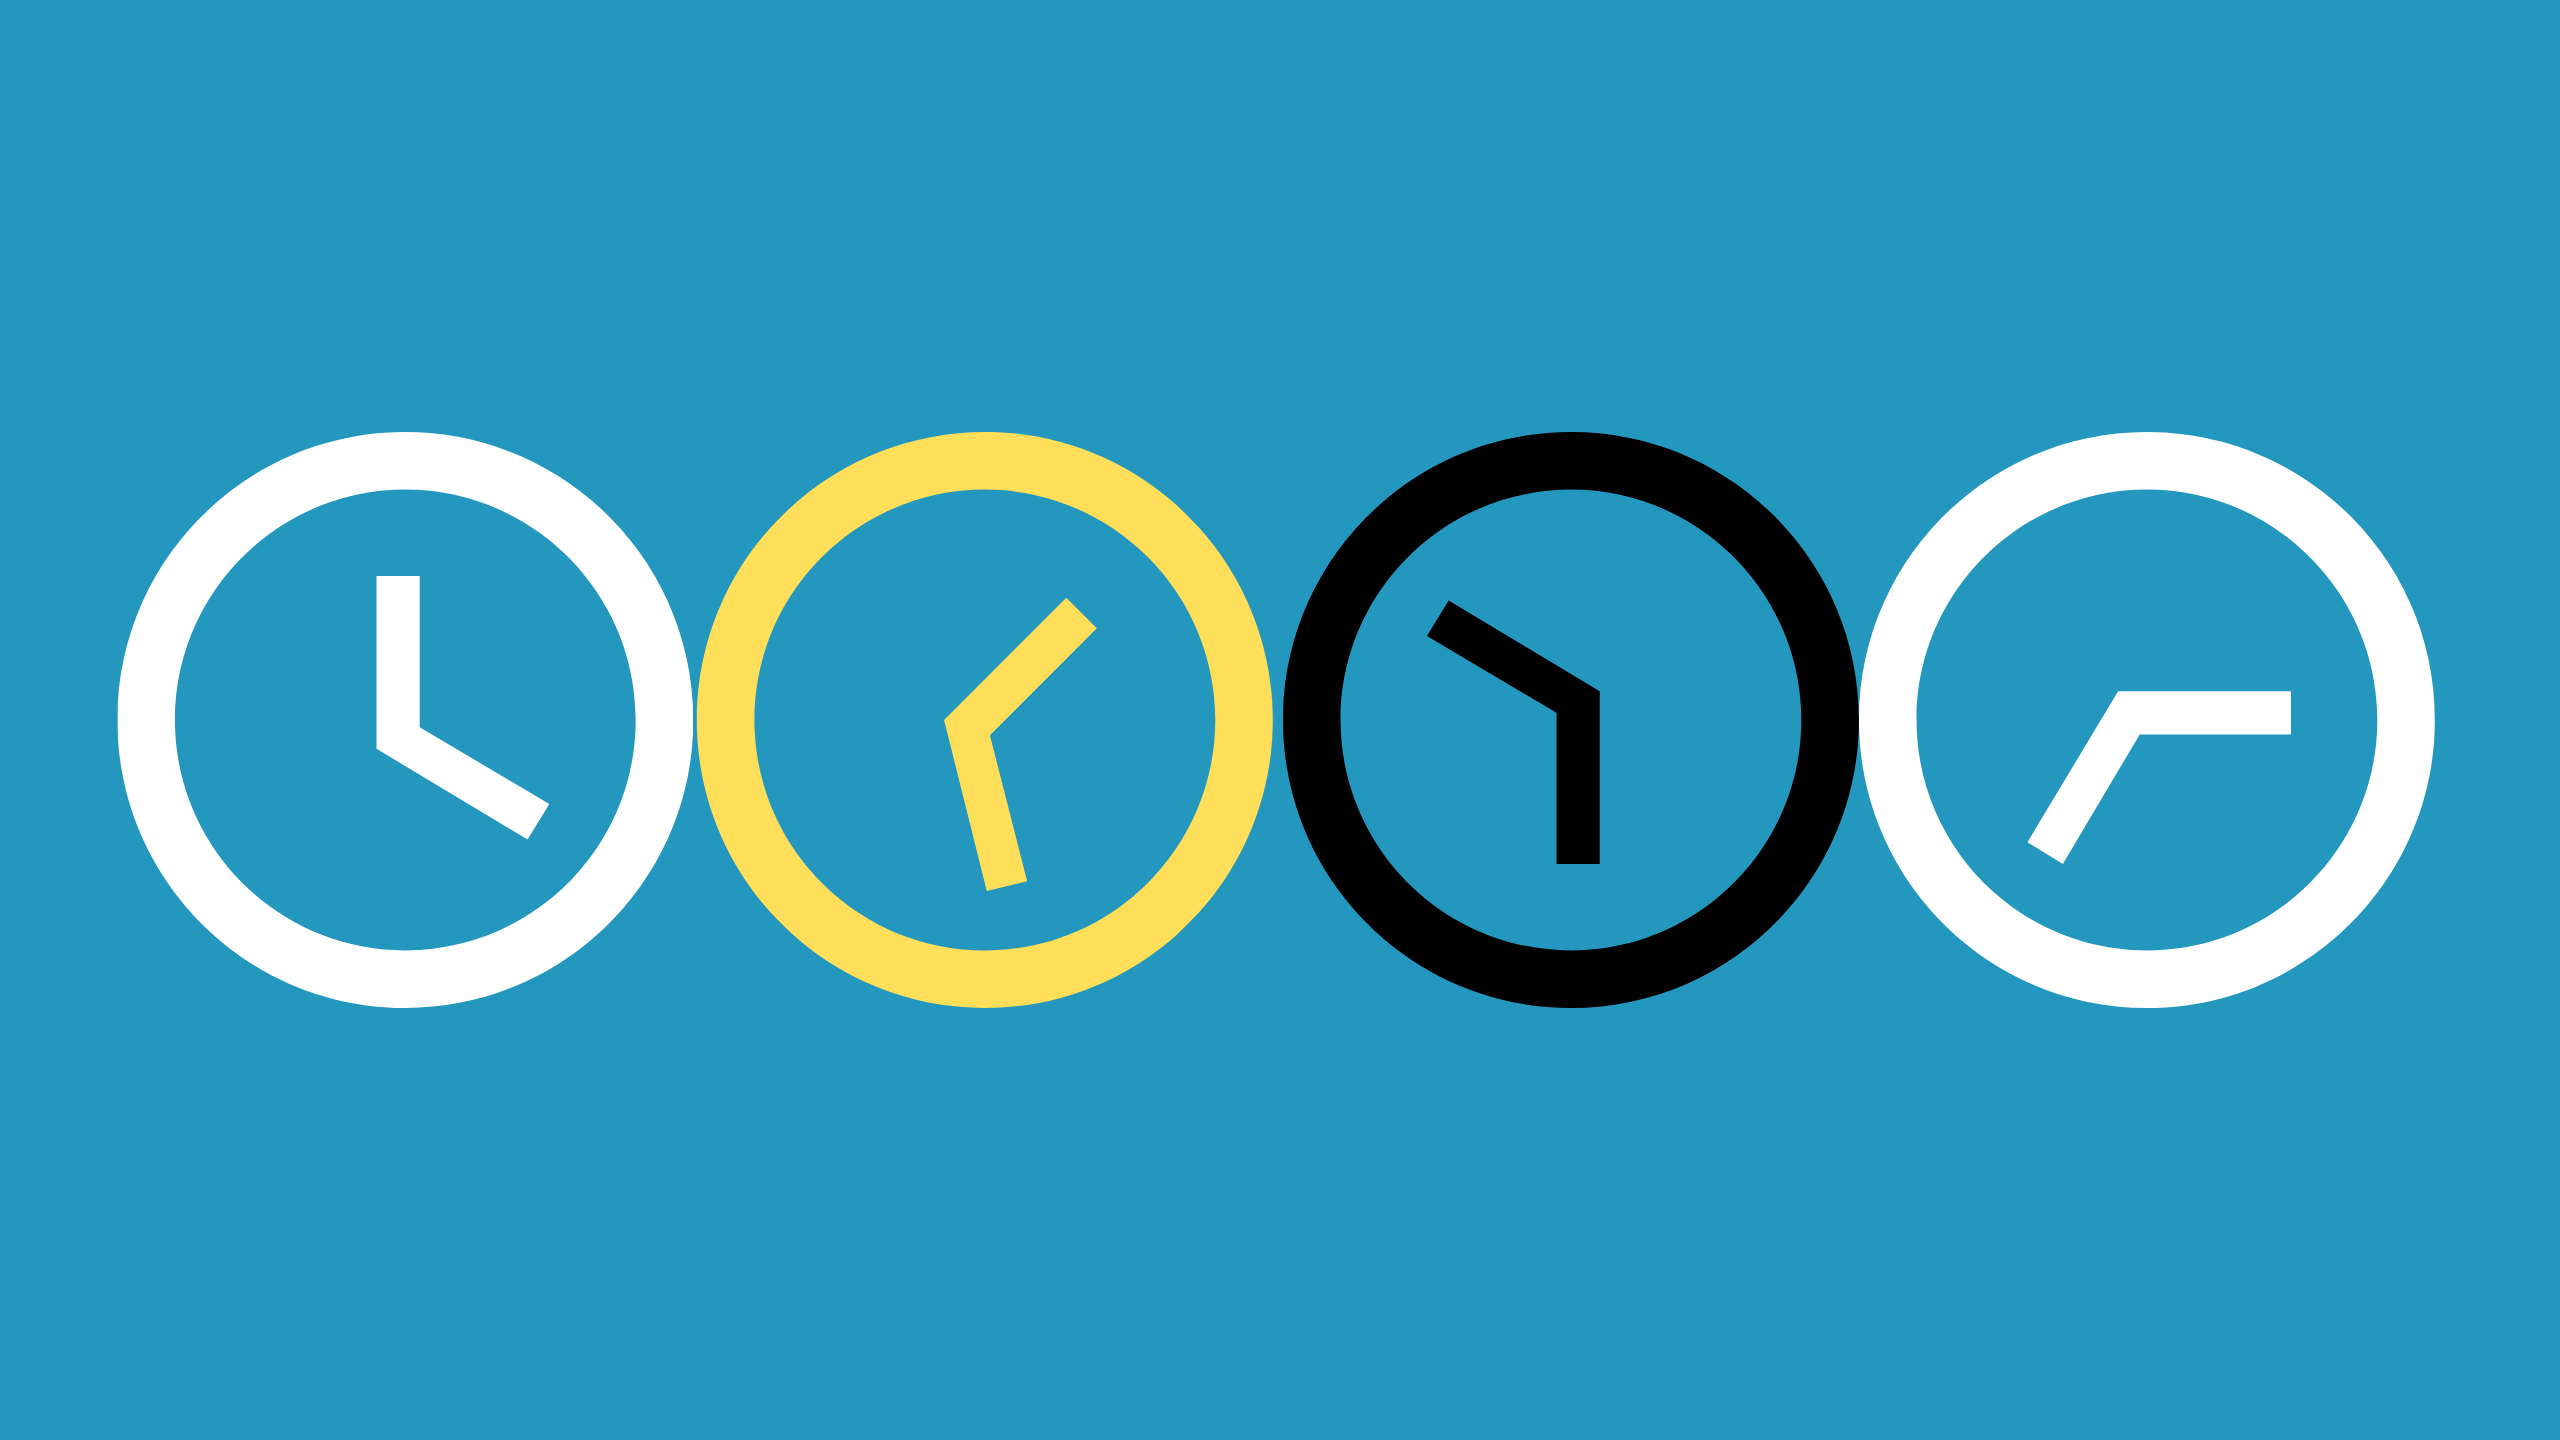 A graphic with four simple clock outlines displaying different times